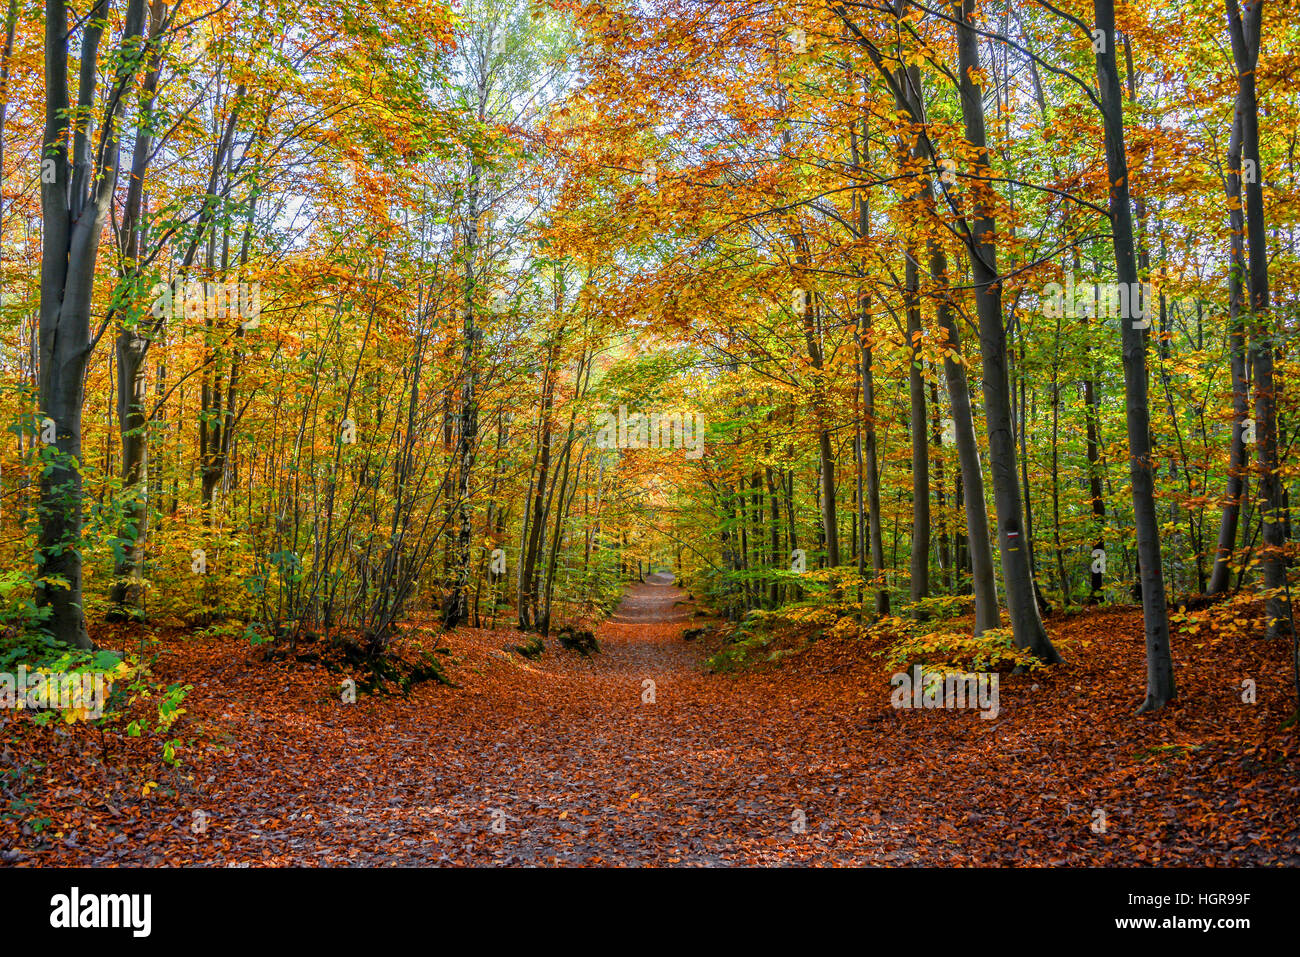 Footpath in a forest in autumn Stock Photo